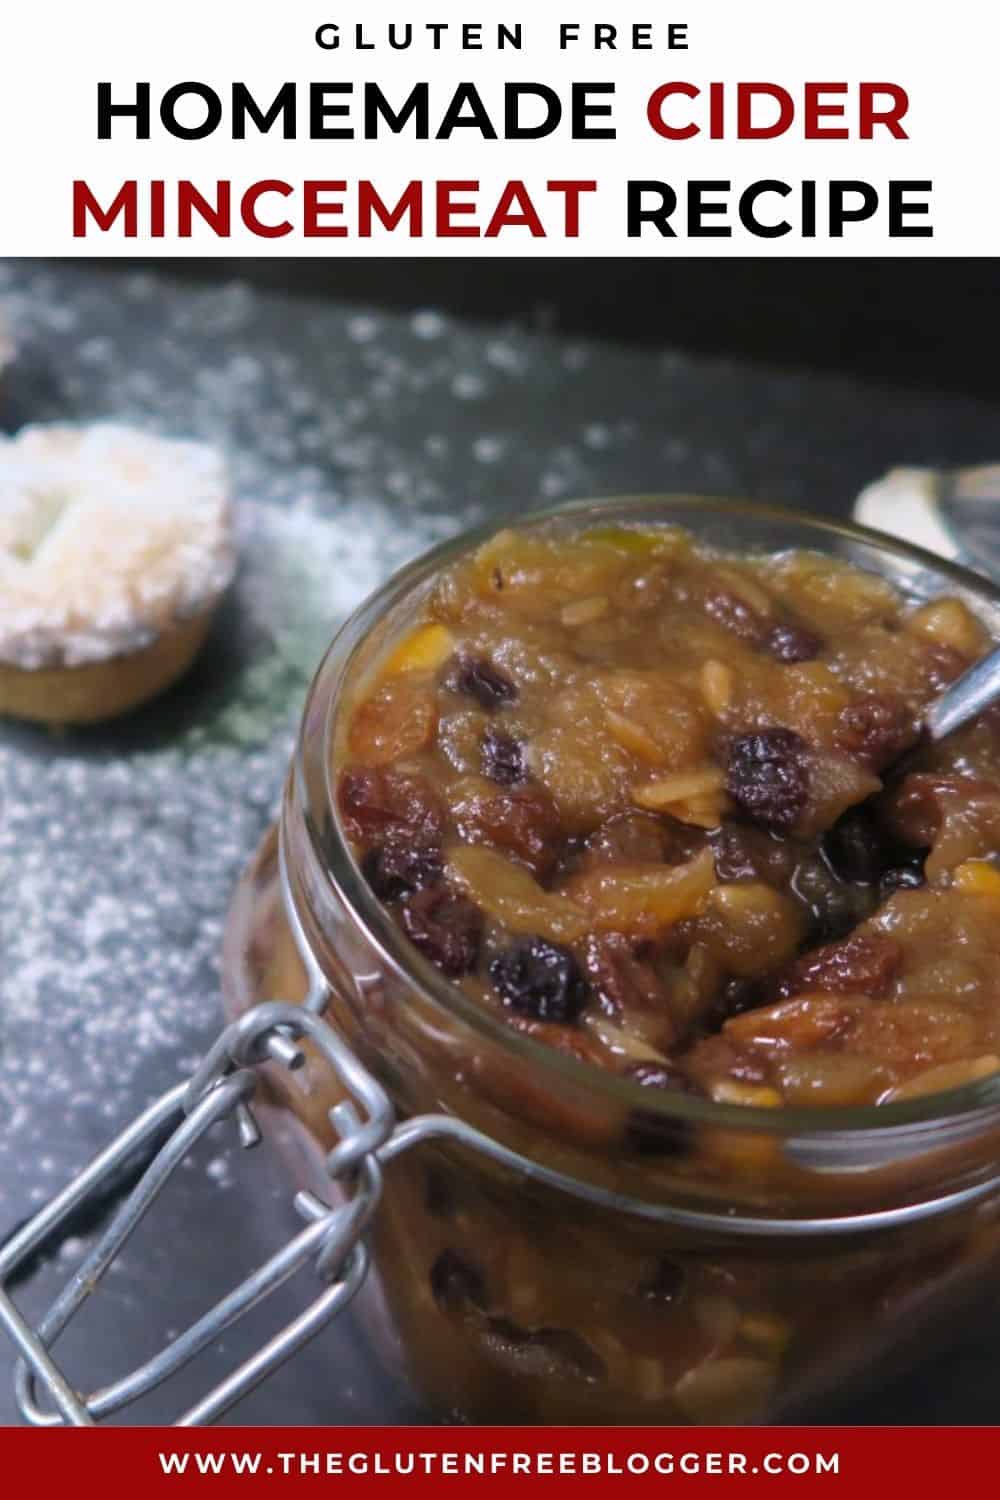 HOMEMADE MINCEMEAT RECIPE WITH CIDER